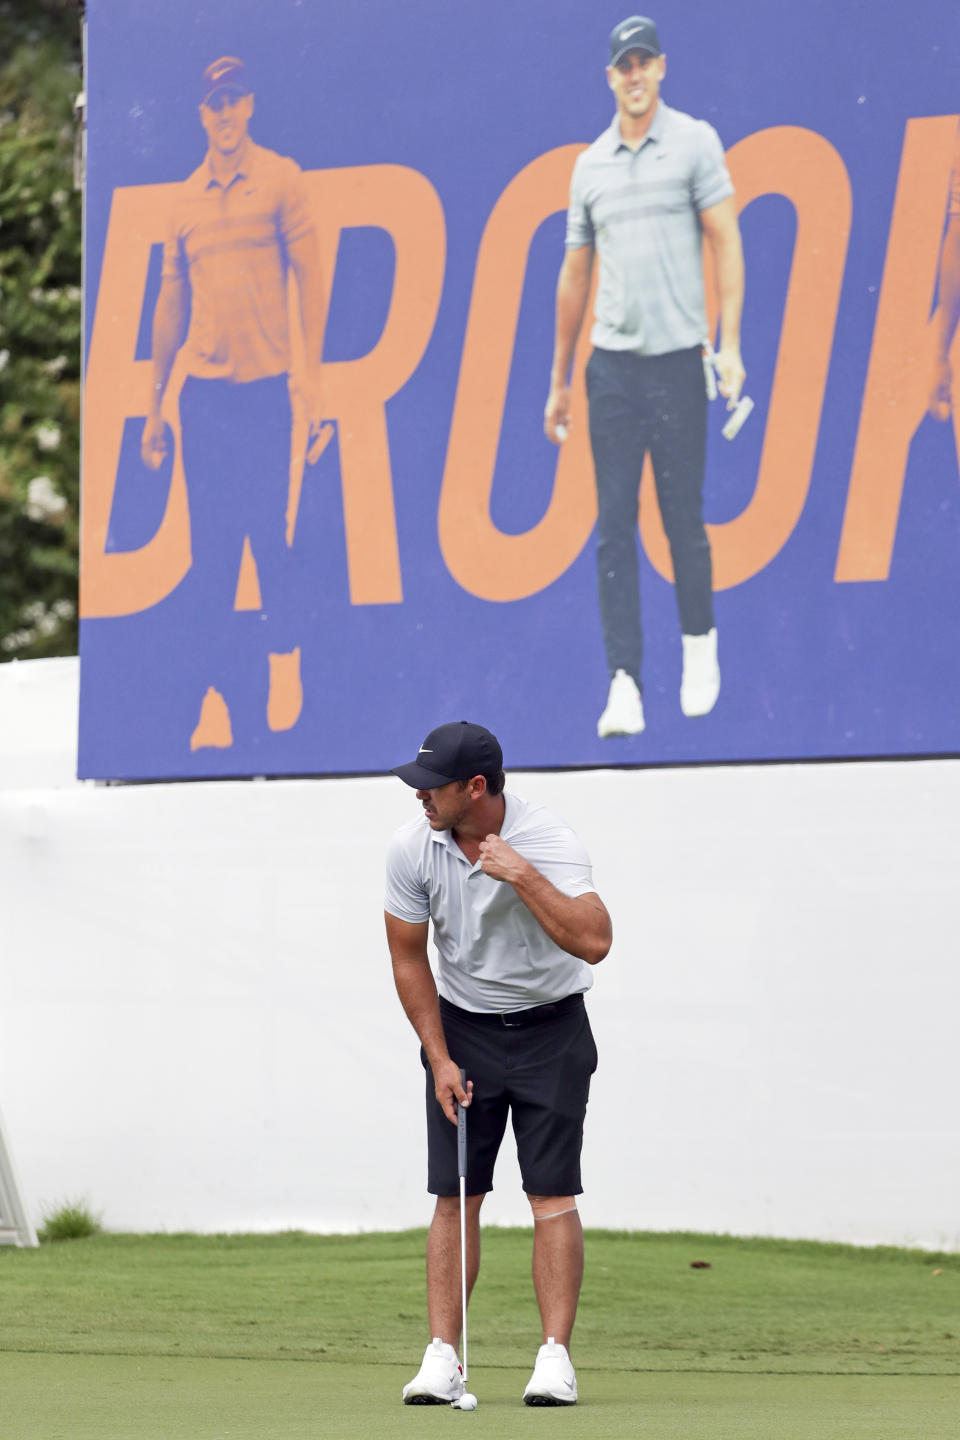 Brooks Koepka putts on the practice green under a banner with his picture at the World Golf Championship-FedEx St. Jude Invitational Wednesday, July 29, 2020, in Memphis, Tenn. Koepka, who won three times last year is trying to defend his FedEx St. Jude Invitational title with an injured left knee that has had him putting more weight on his right leg and affecting his game. (AP Photo/Mark Humphrey)